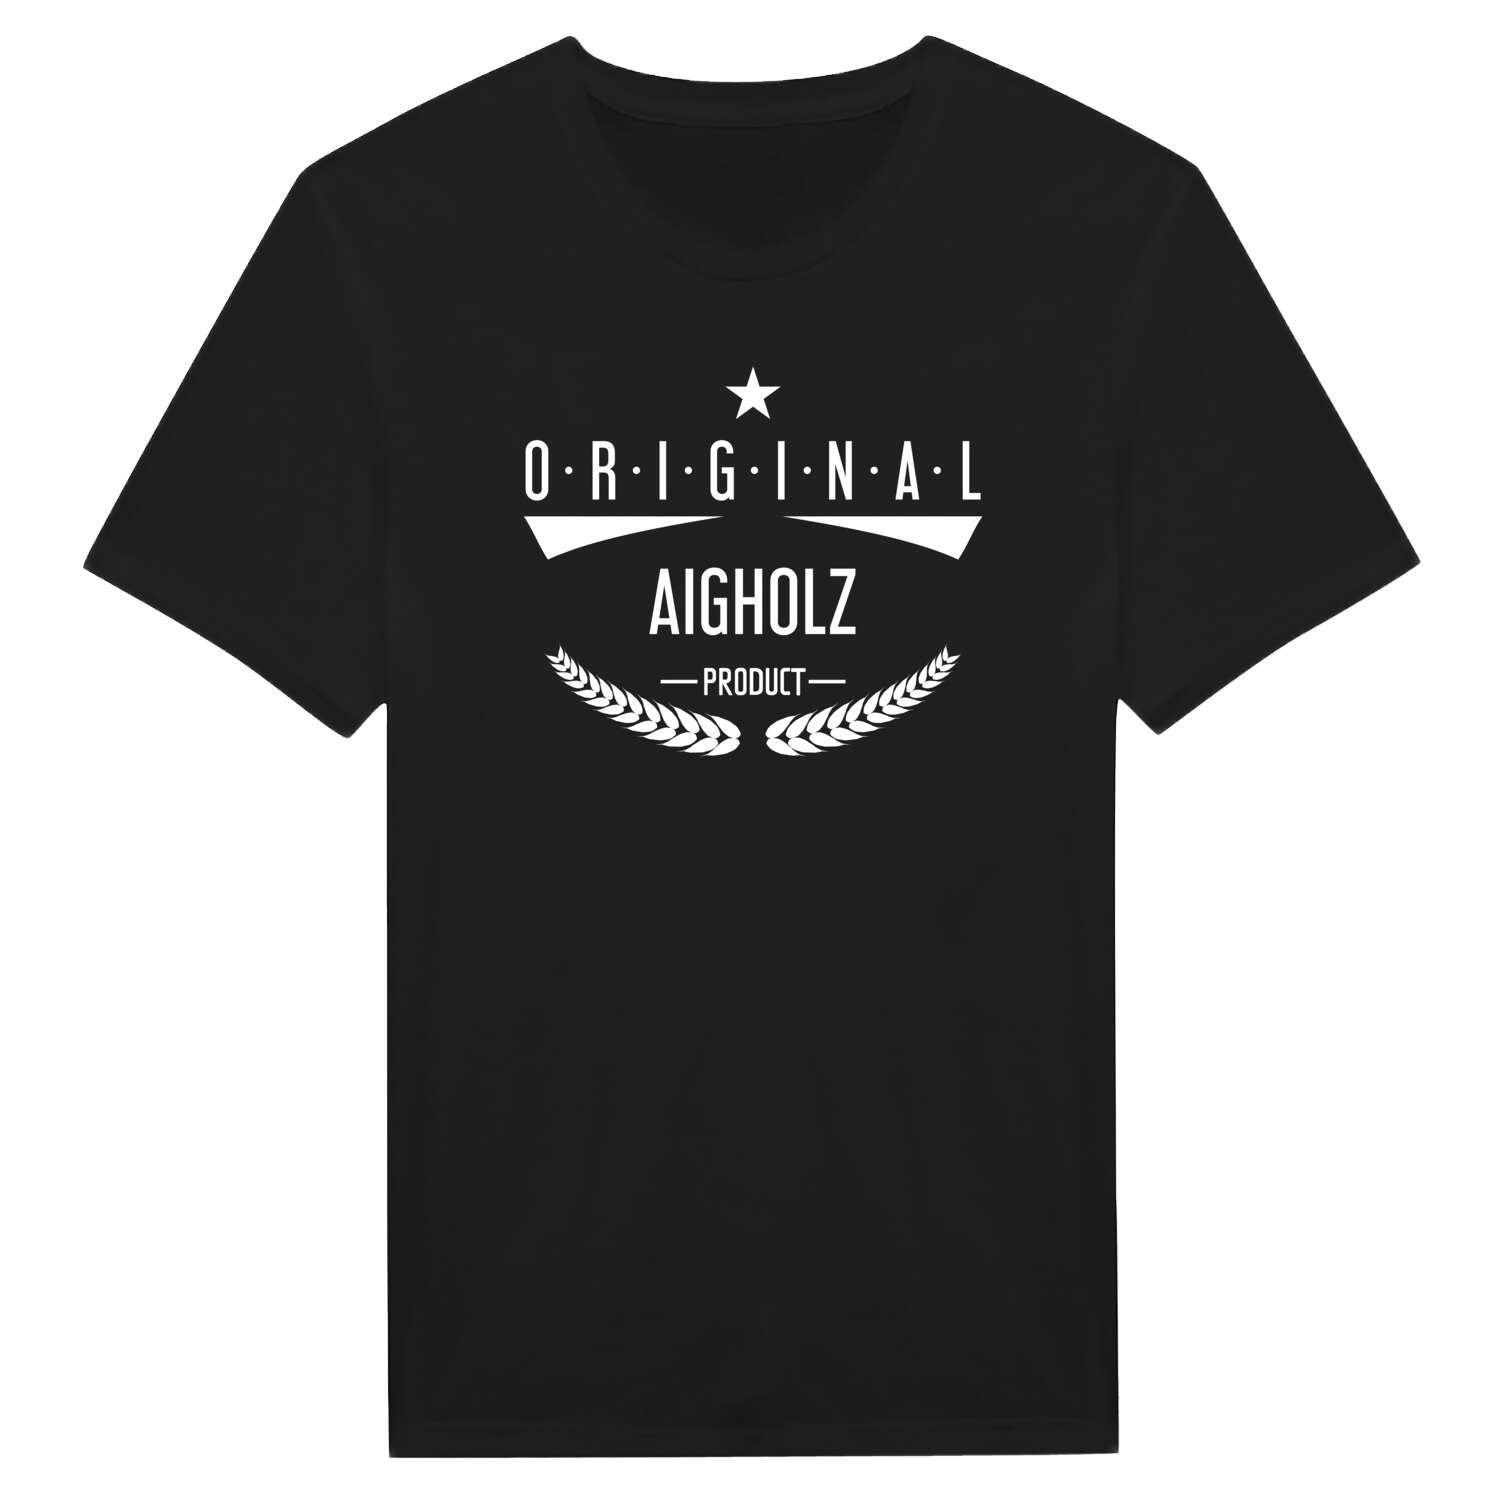 Aigholz T-Shirt »Original Product«